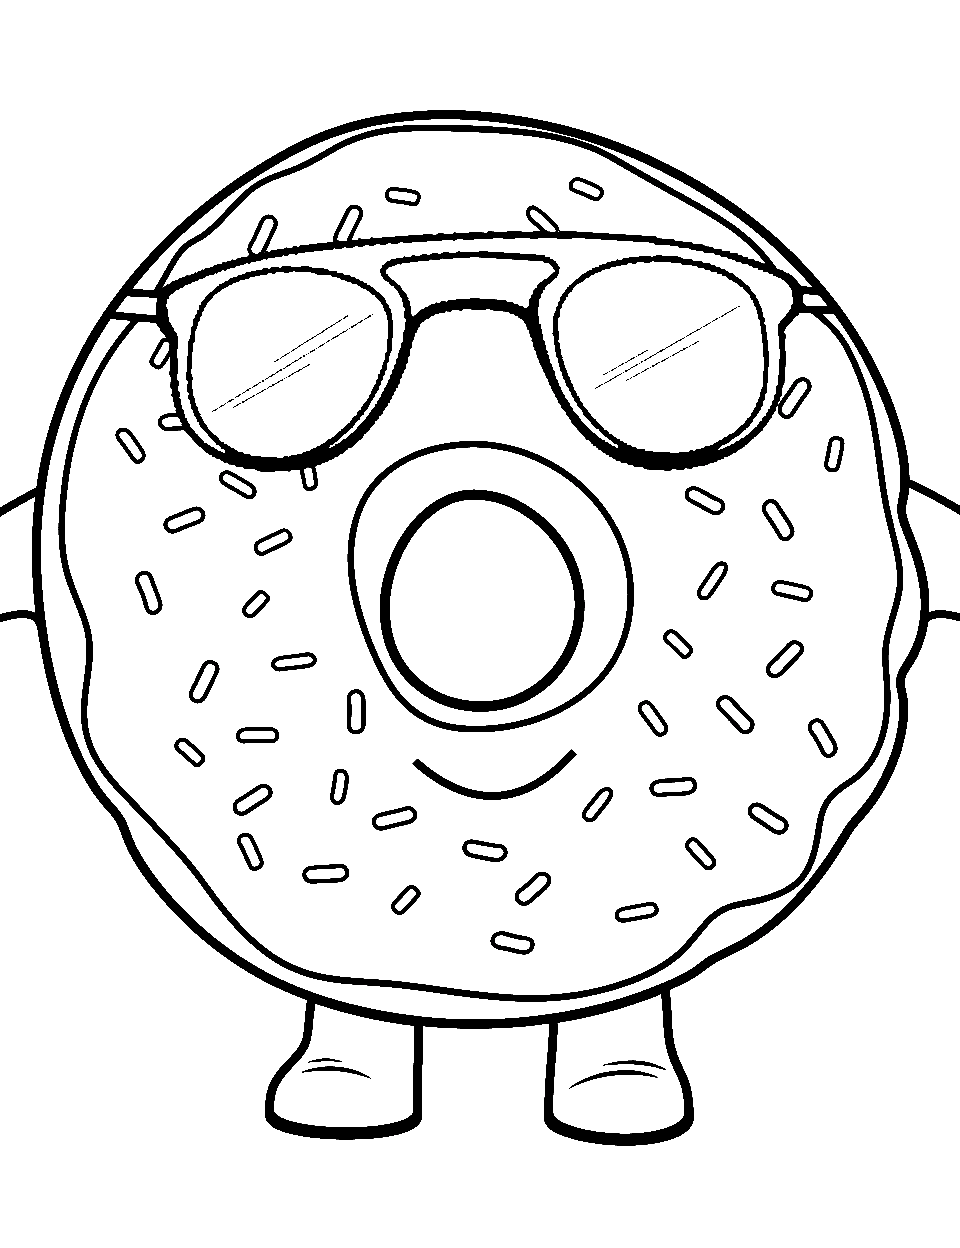 Cool Doughnut with Glasses Donut Coloring Page - A doughnut character wearing Glasses, looking cool.